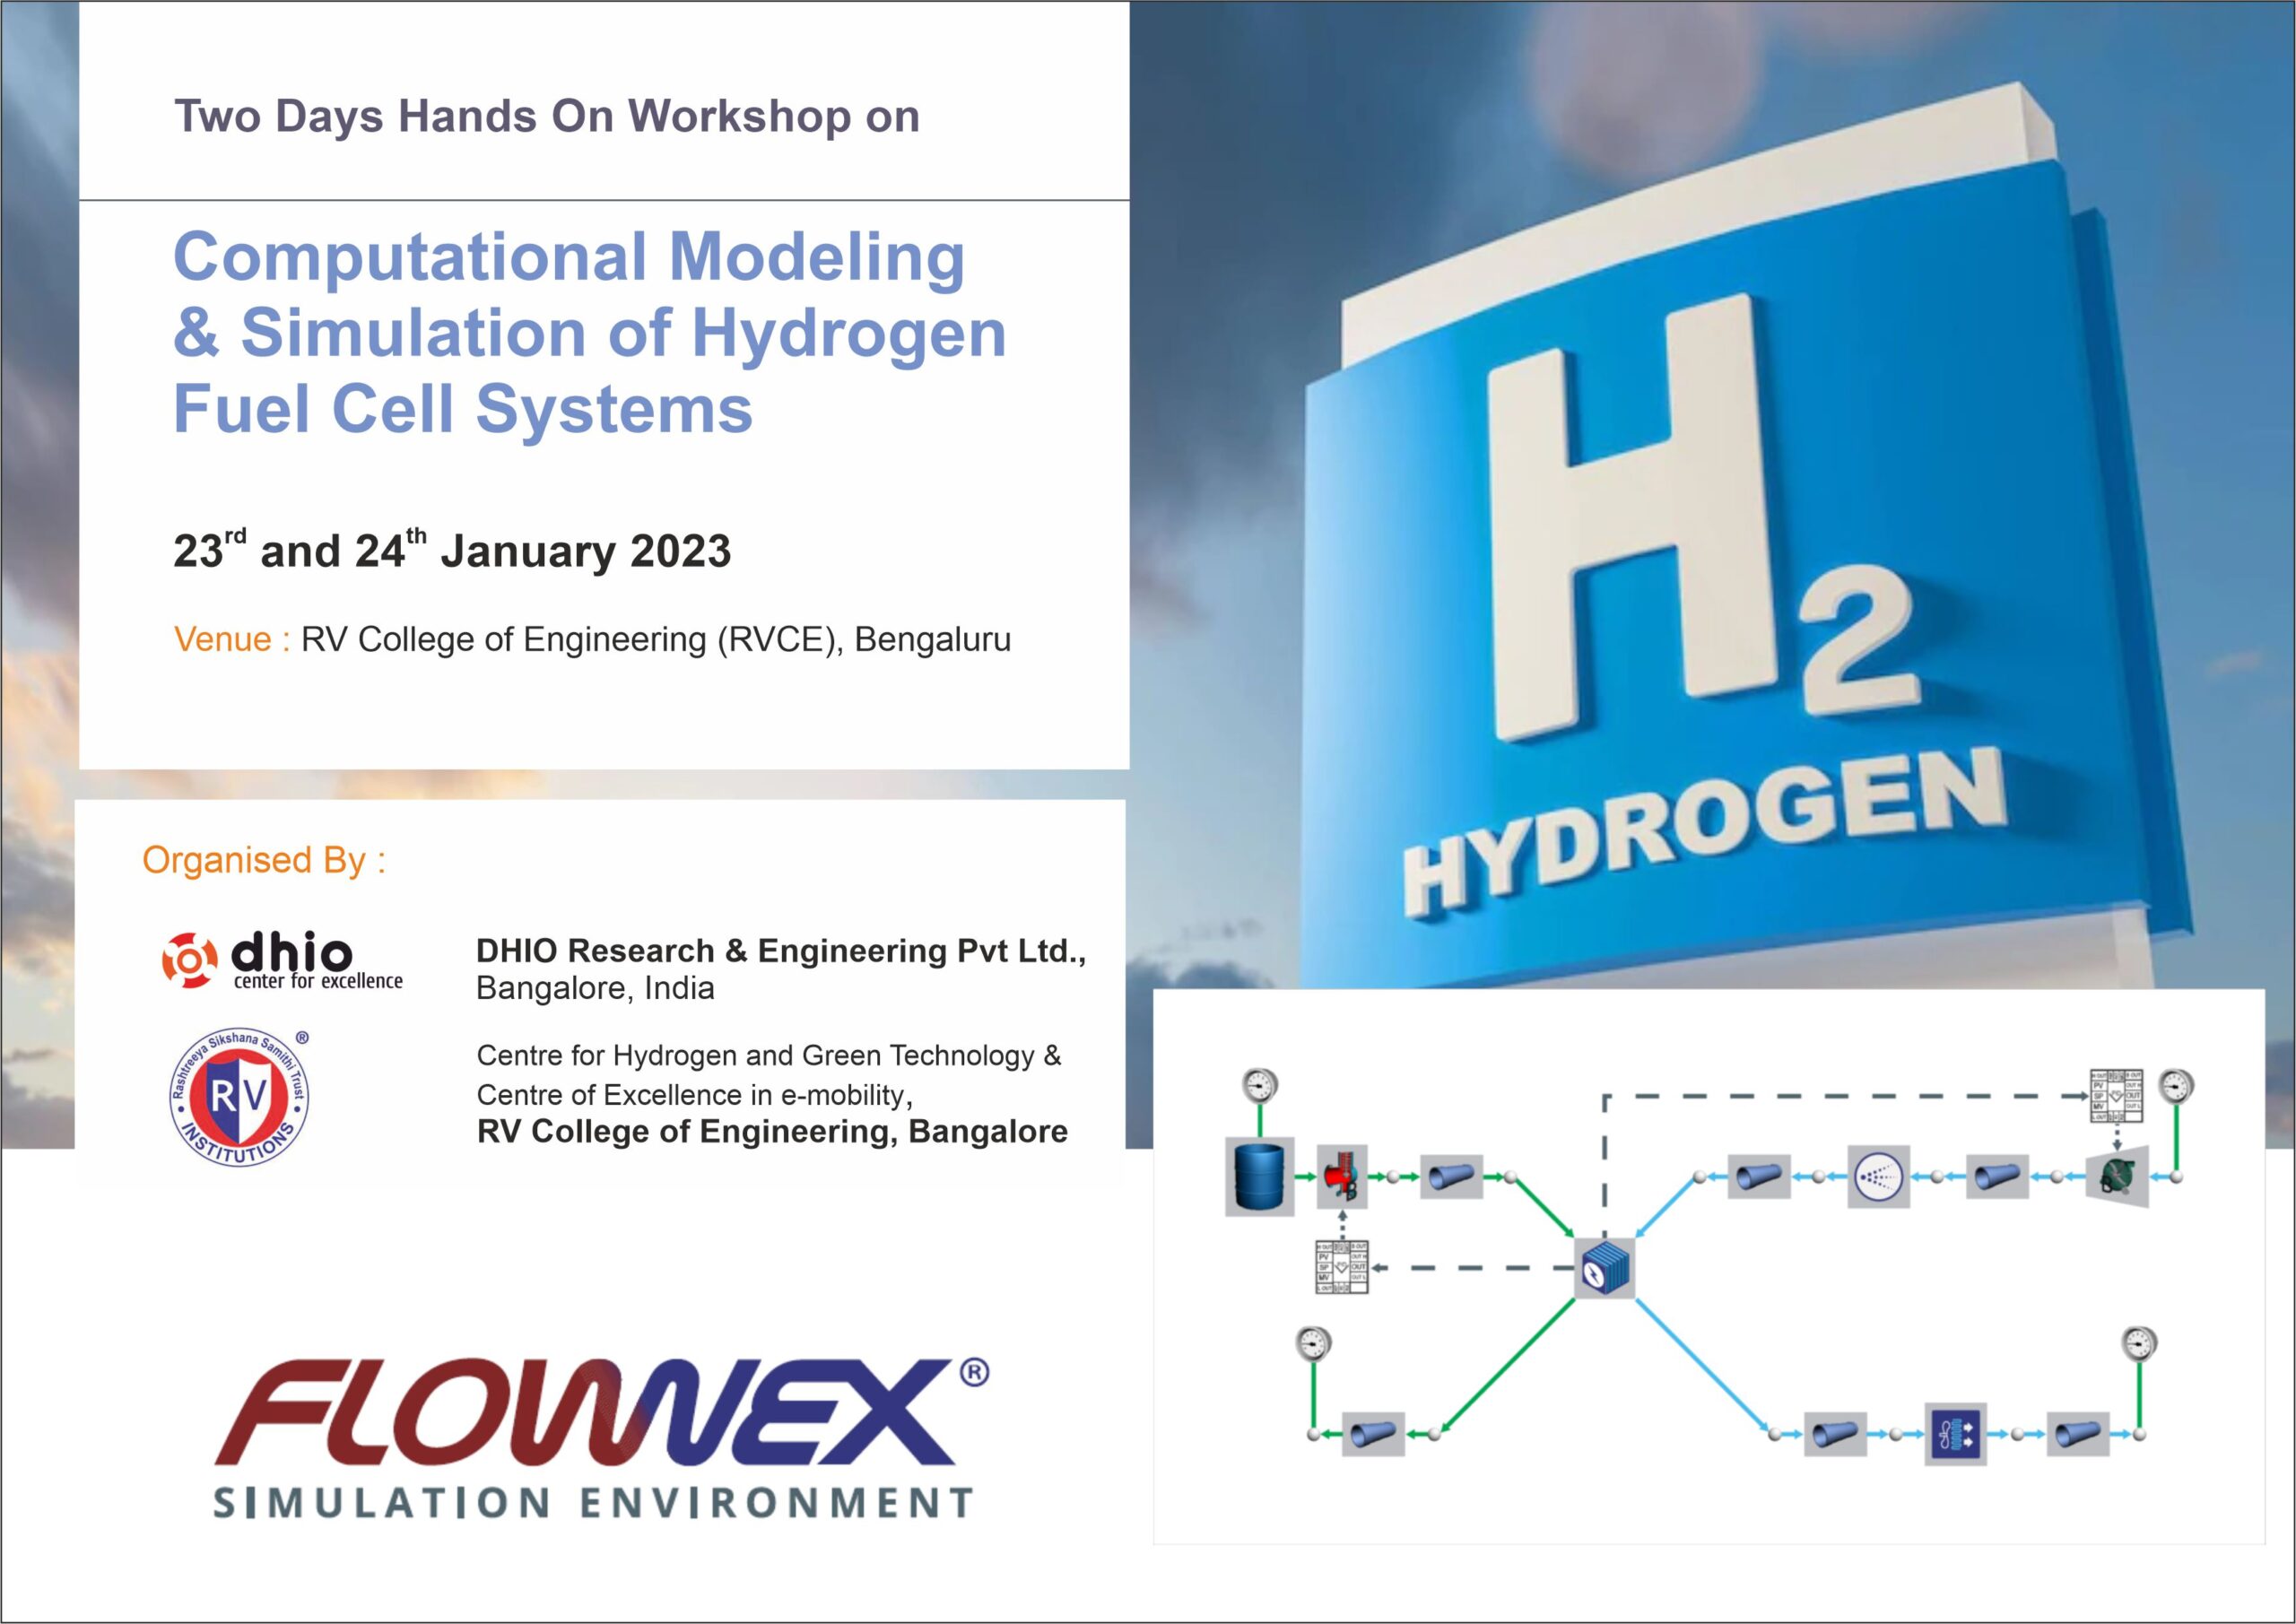 2 Days workshop on Computational Modeling & Simulation of Hydrogen Fuel Cell Systems